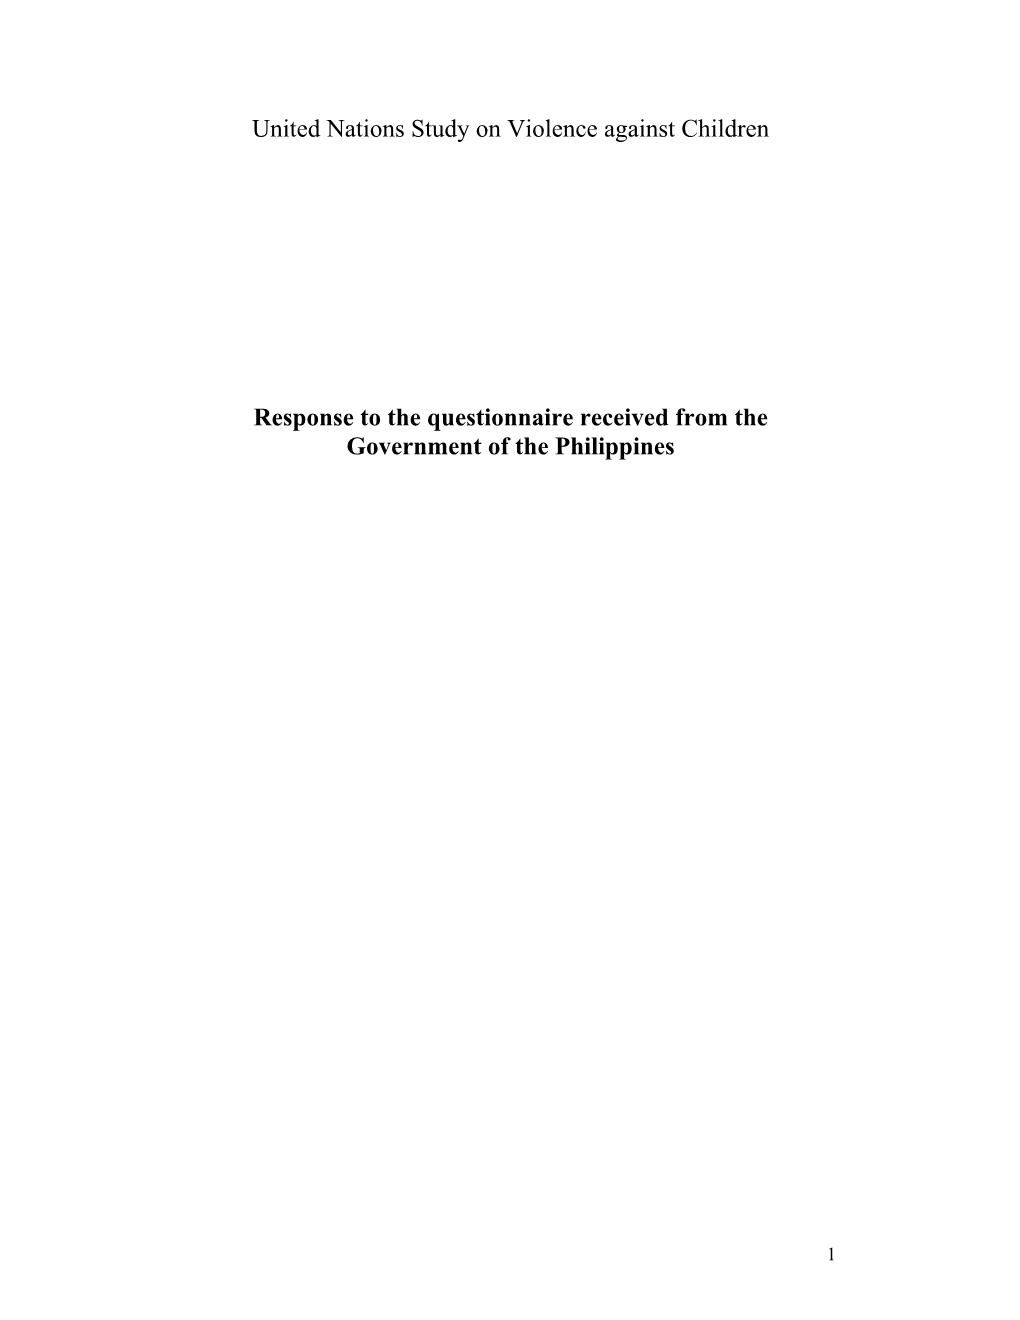 United Nations Study on Violence Against Children Response to the Questionnaire Received from the Government of the Philippines